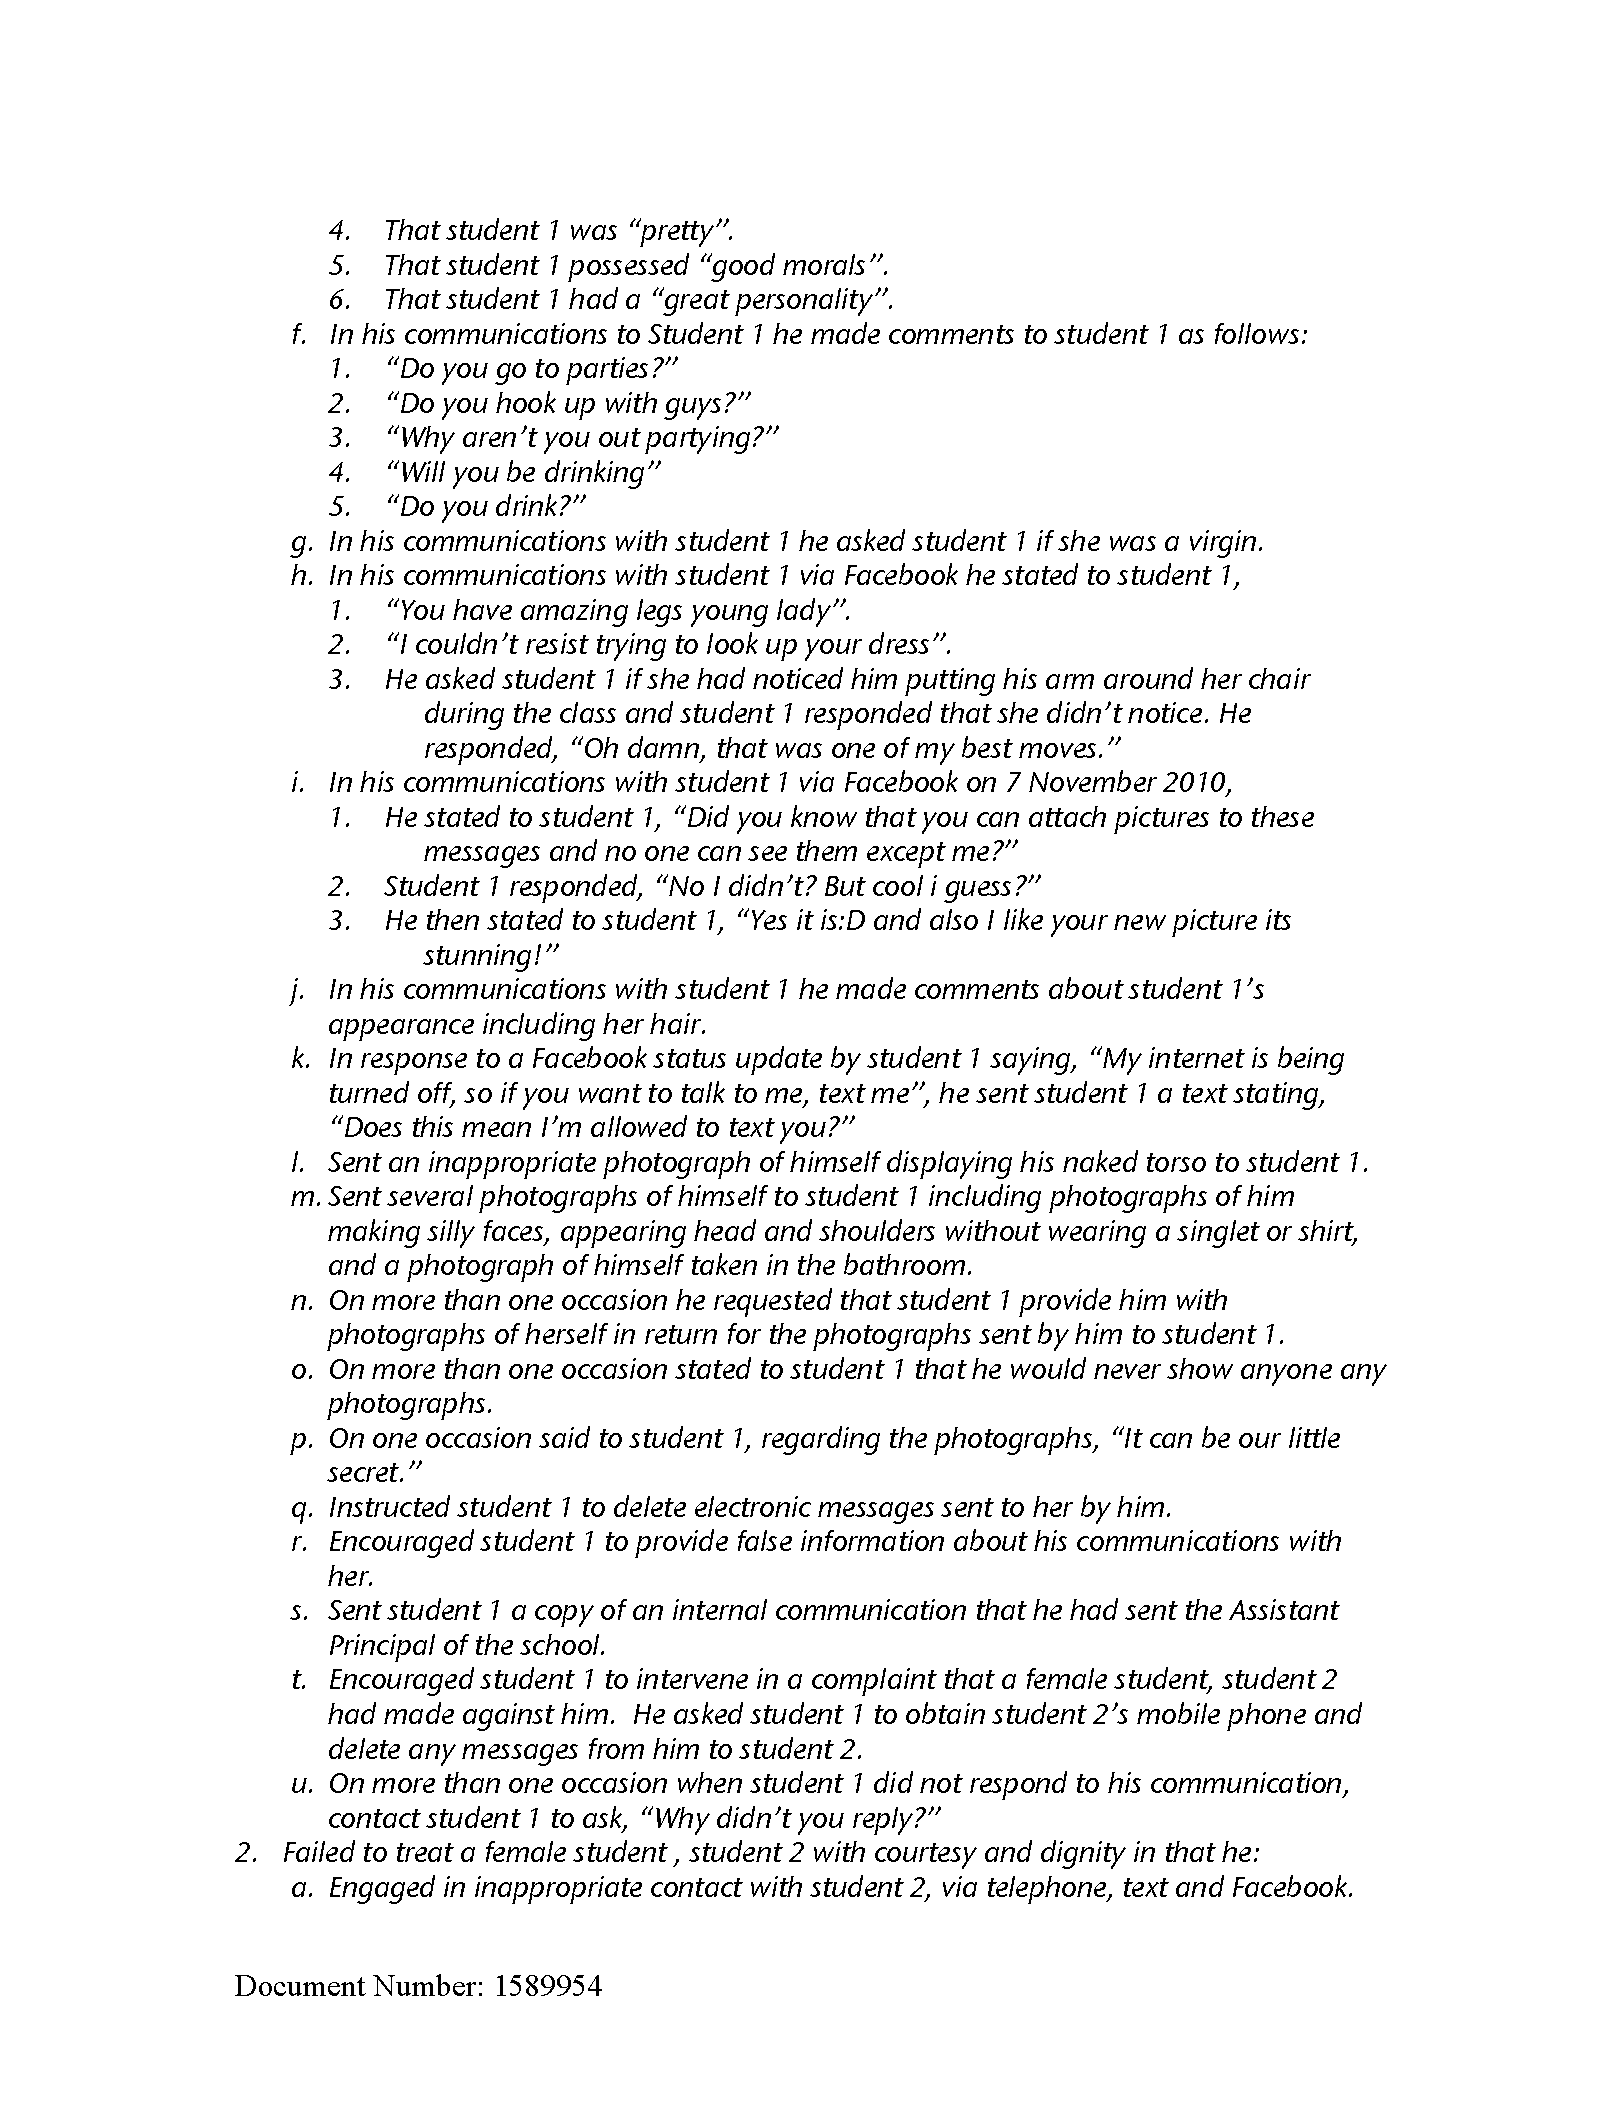 Copy of SanitisedPleydellDecision03.png